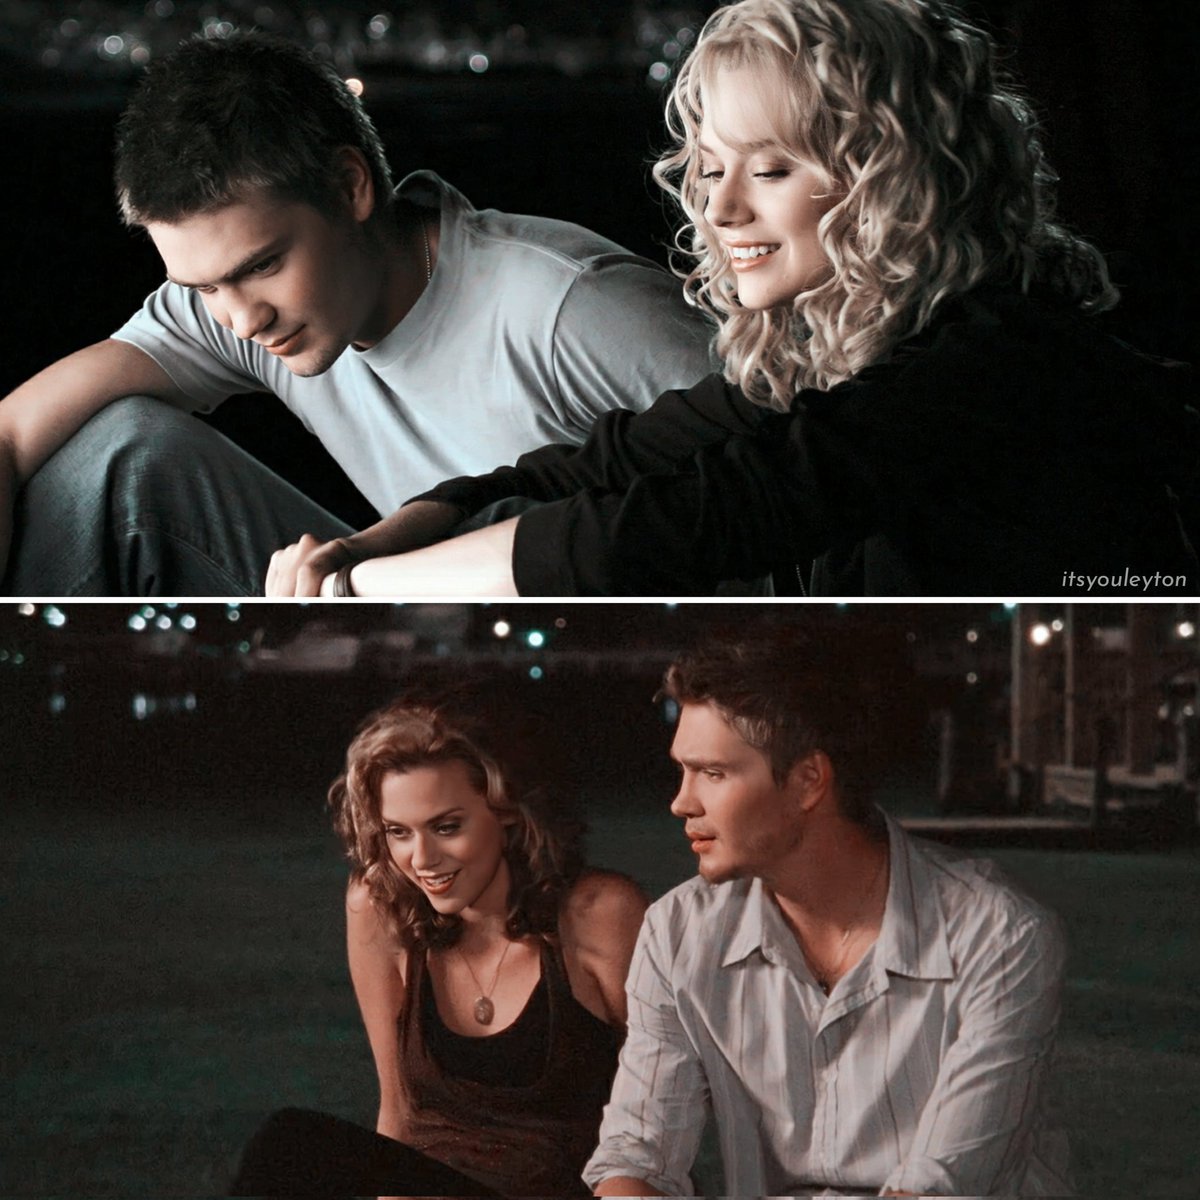 It's always gonna be there. Them.
And me supporting them.

#Leyton